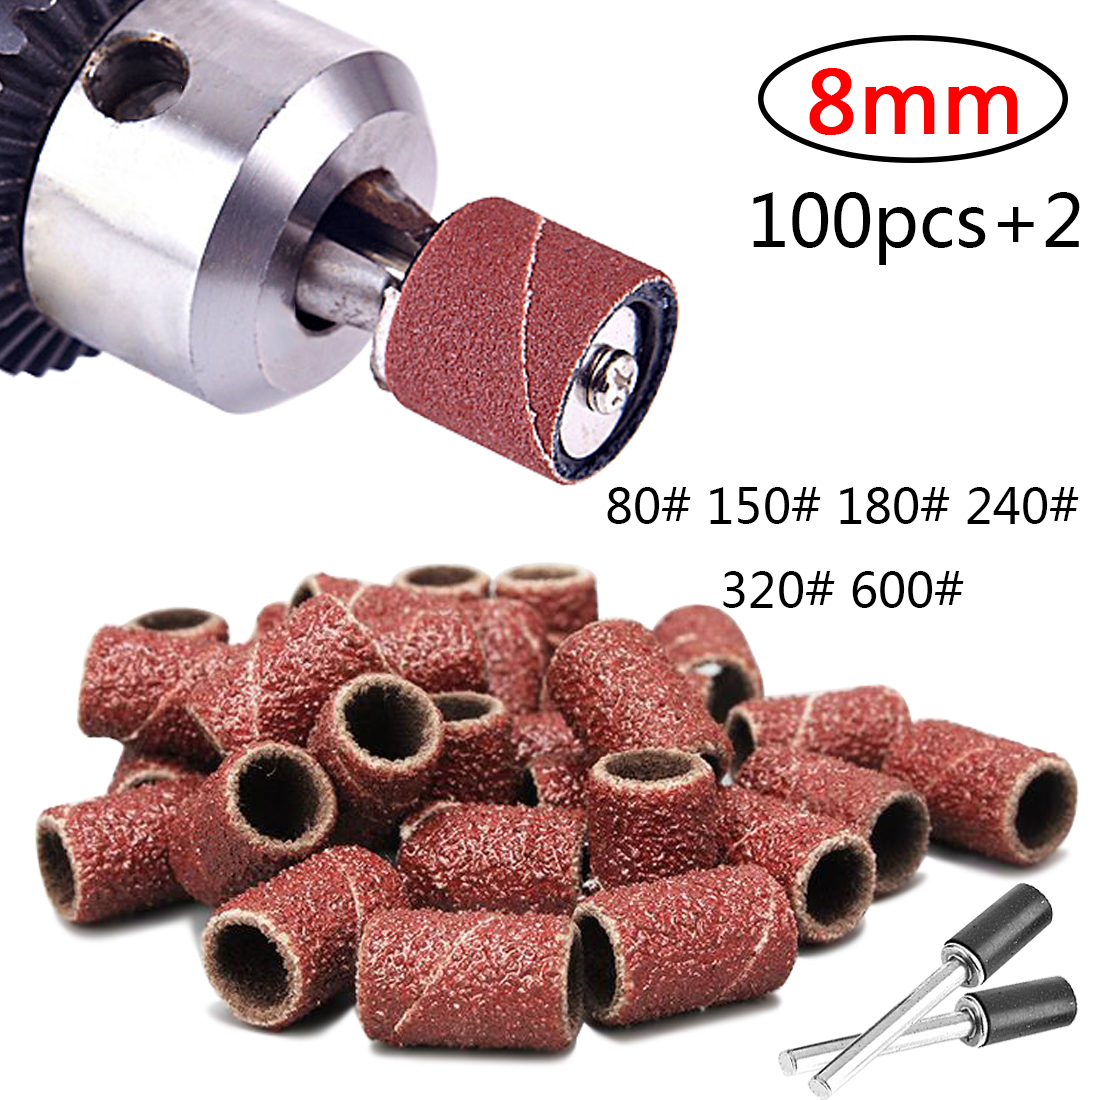 1/2" inch 50 pcs 12mm extra fine GRIT 320 Rotary SANDING DRUM with 2 Mandrel 